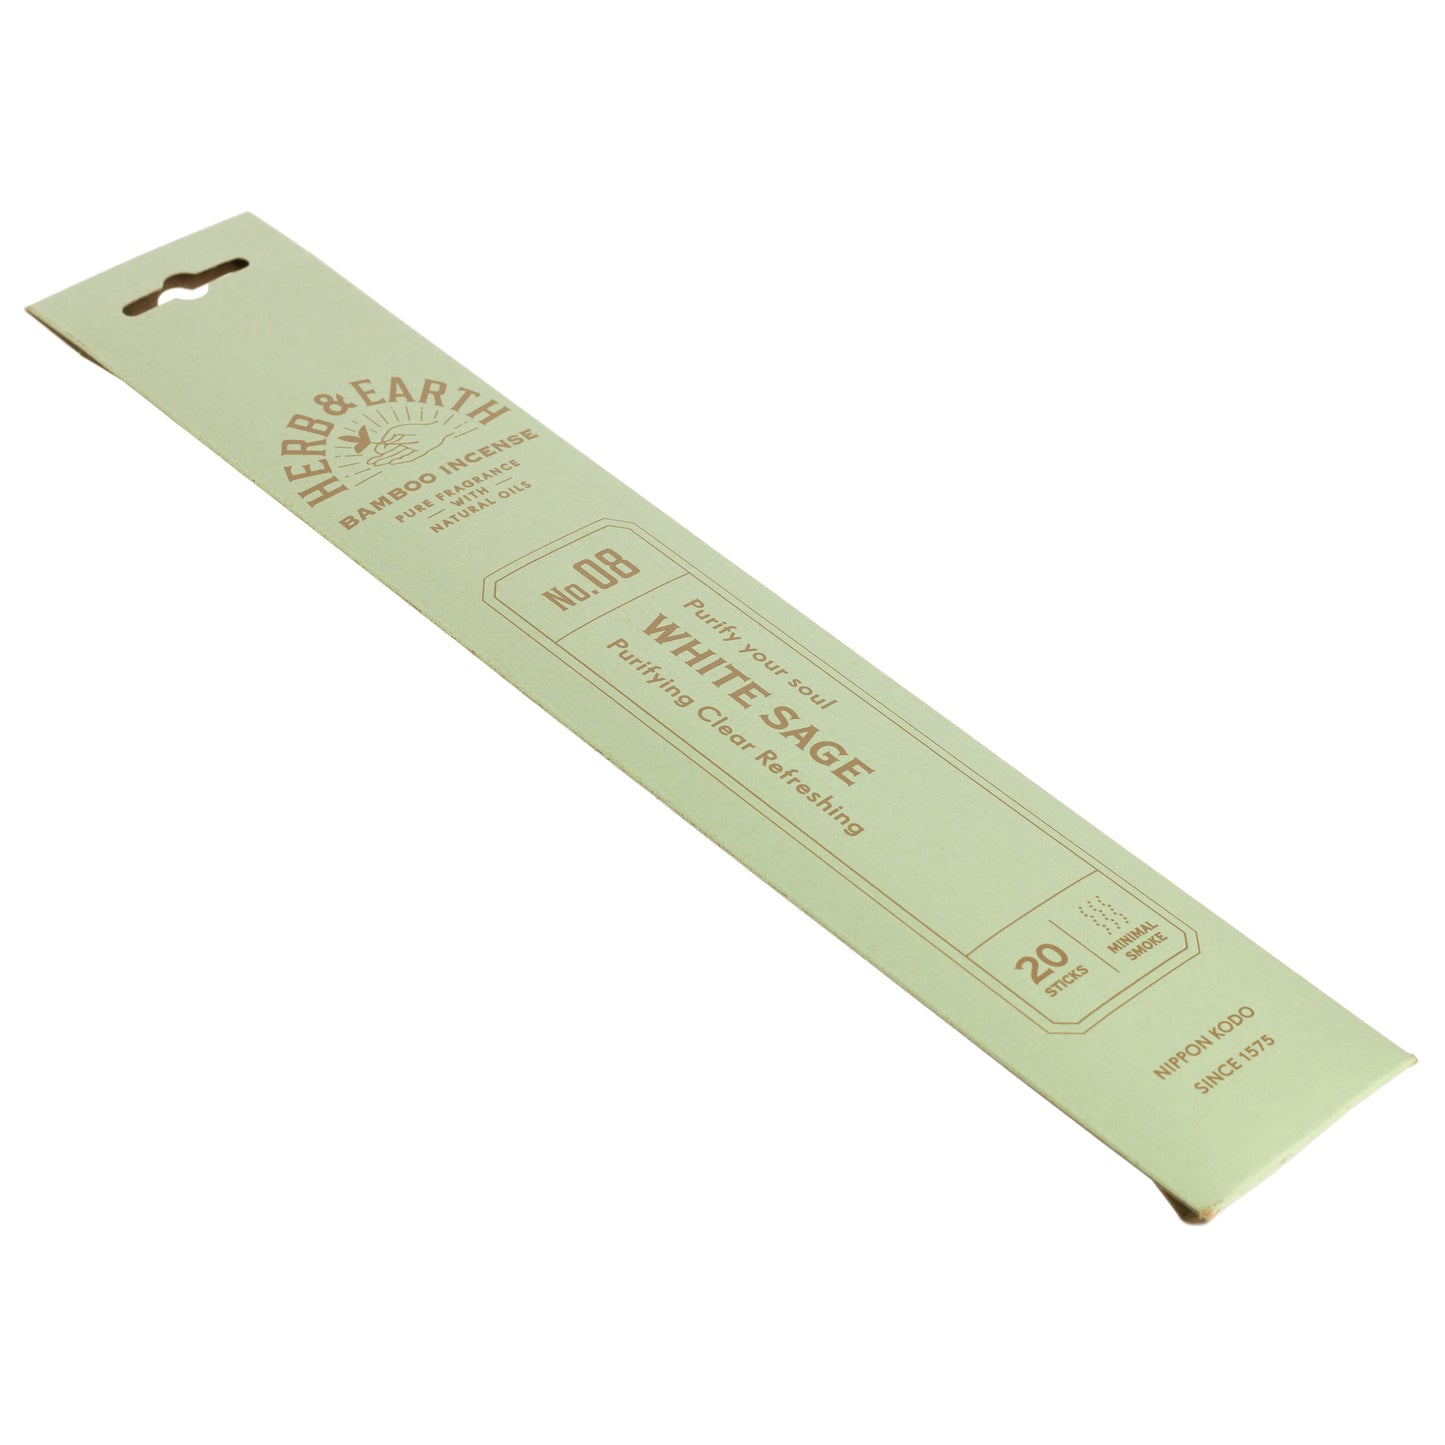 Herb & Earth Incense - White Sage